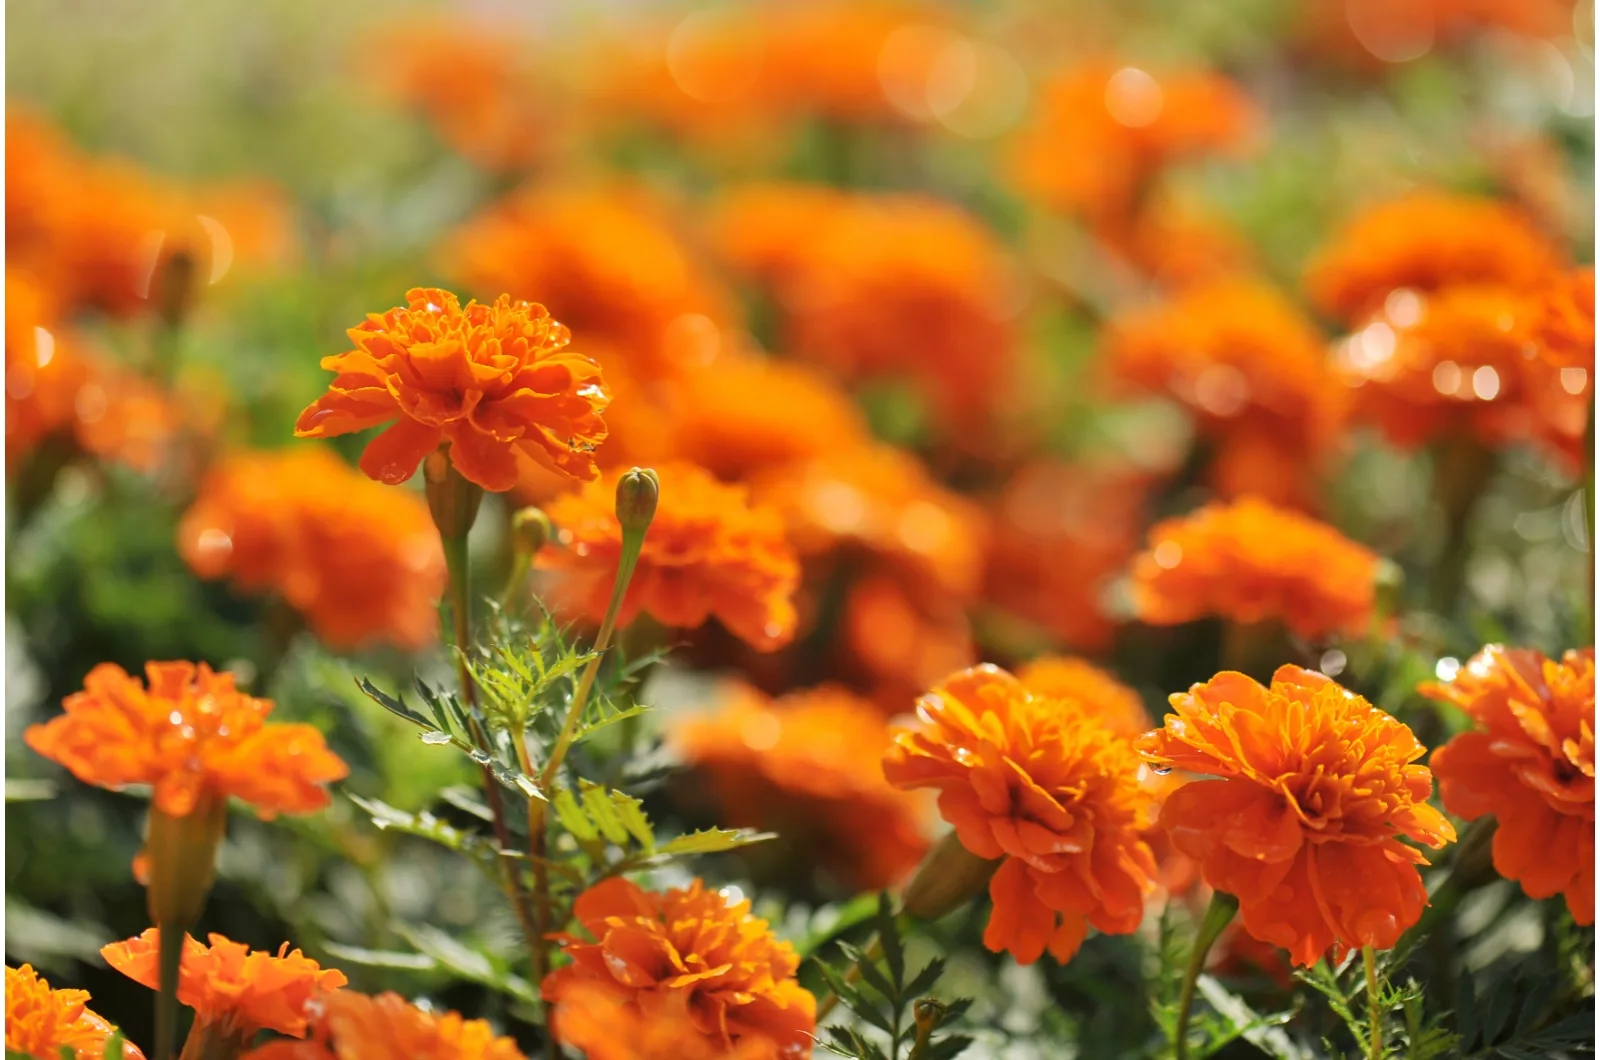 close-up photo of marigold flowers